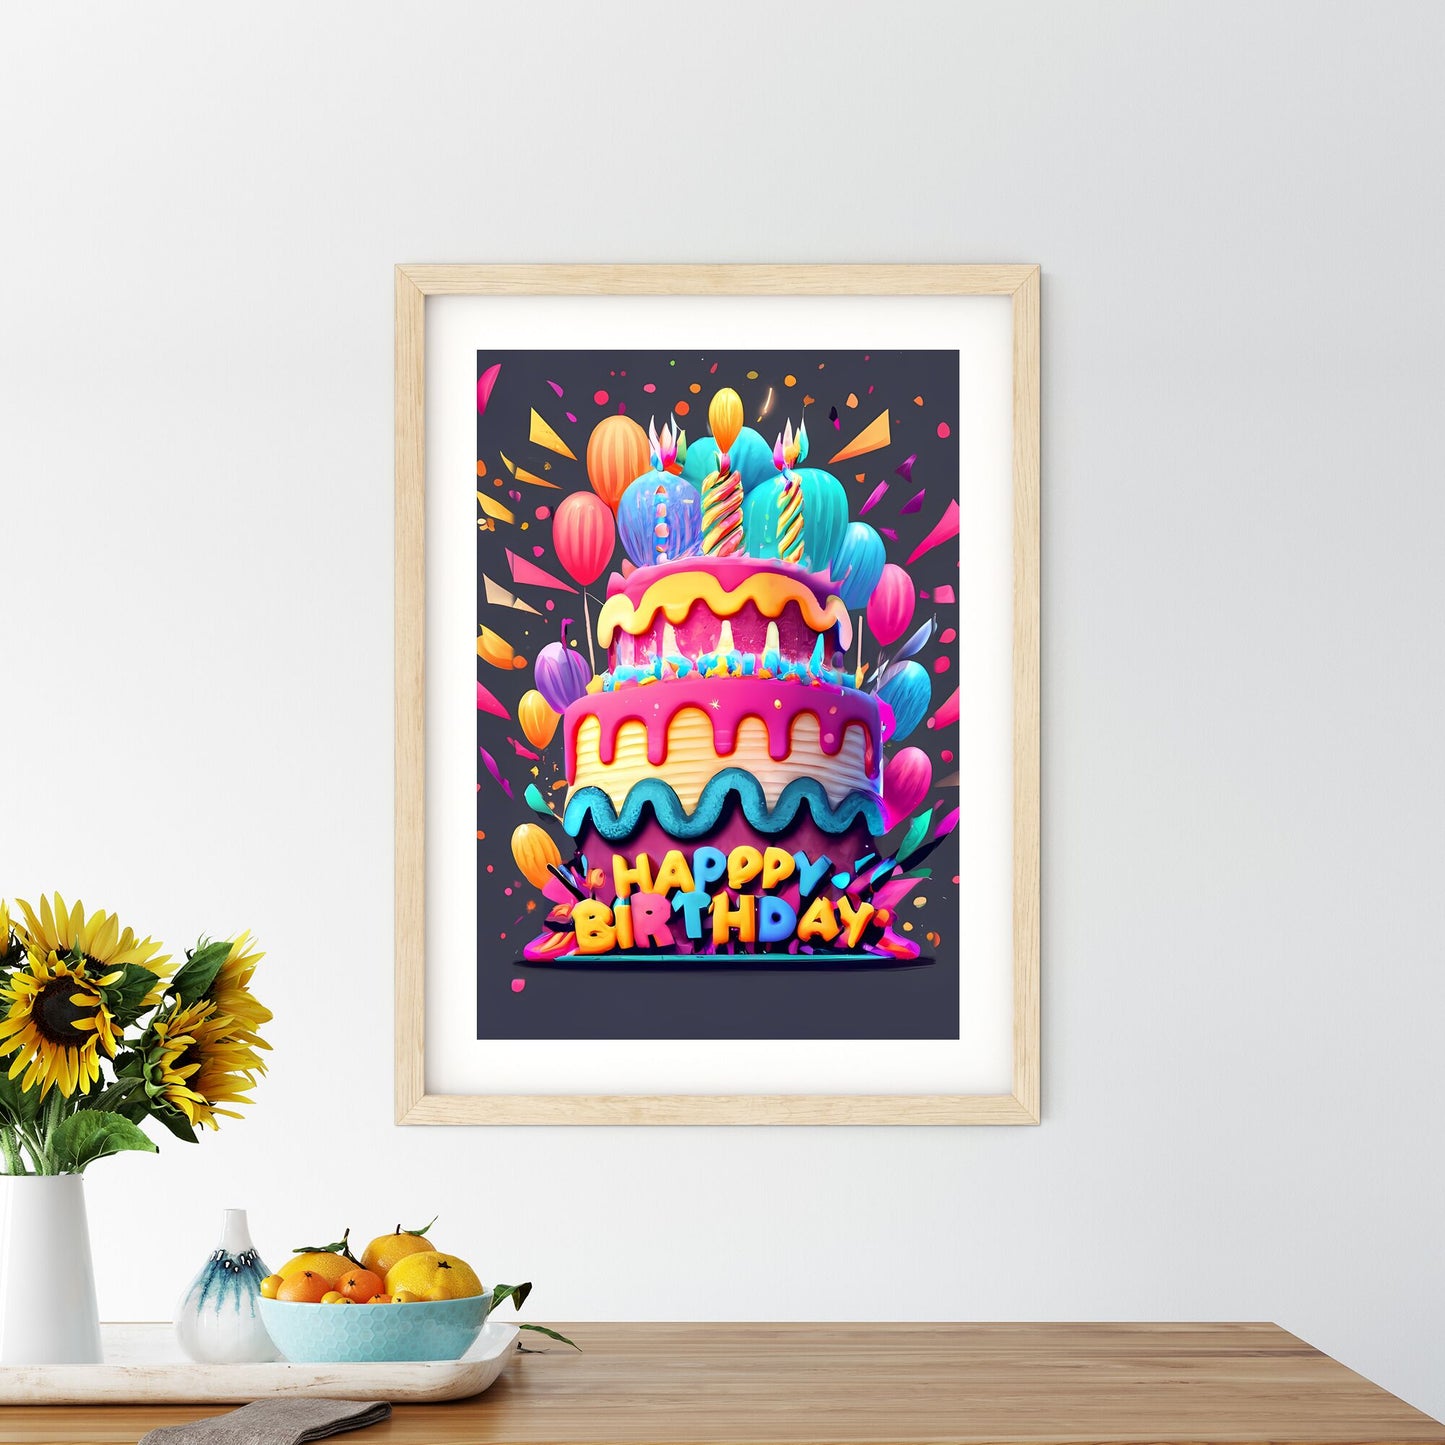 Happy Birthday - A Colorful Birthday Cake With Balloons And Confetti Art Print Default Title